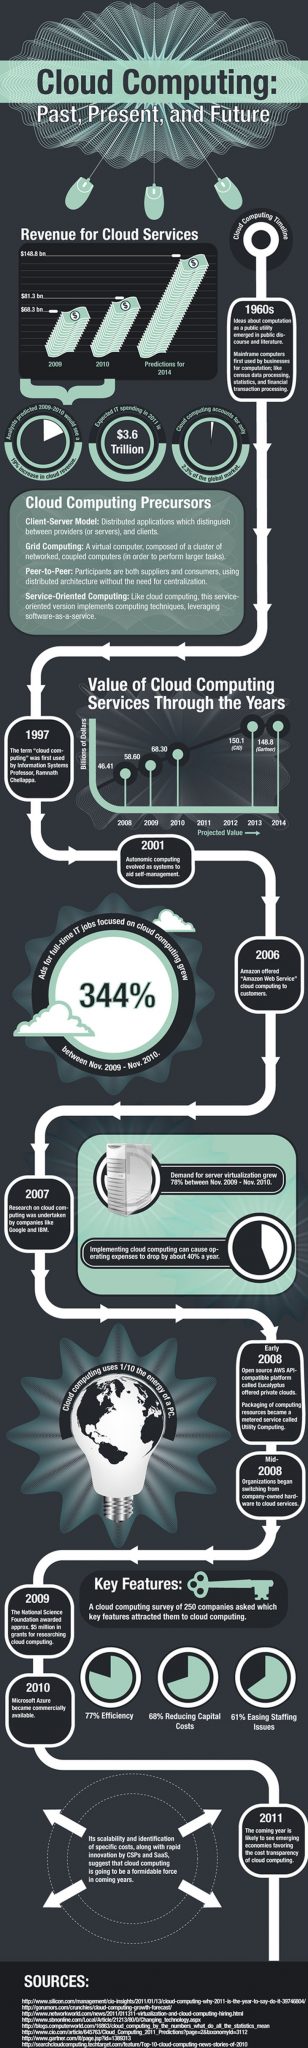 History of Cloud Computing - Infographic Green Cloud Hosting